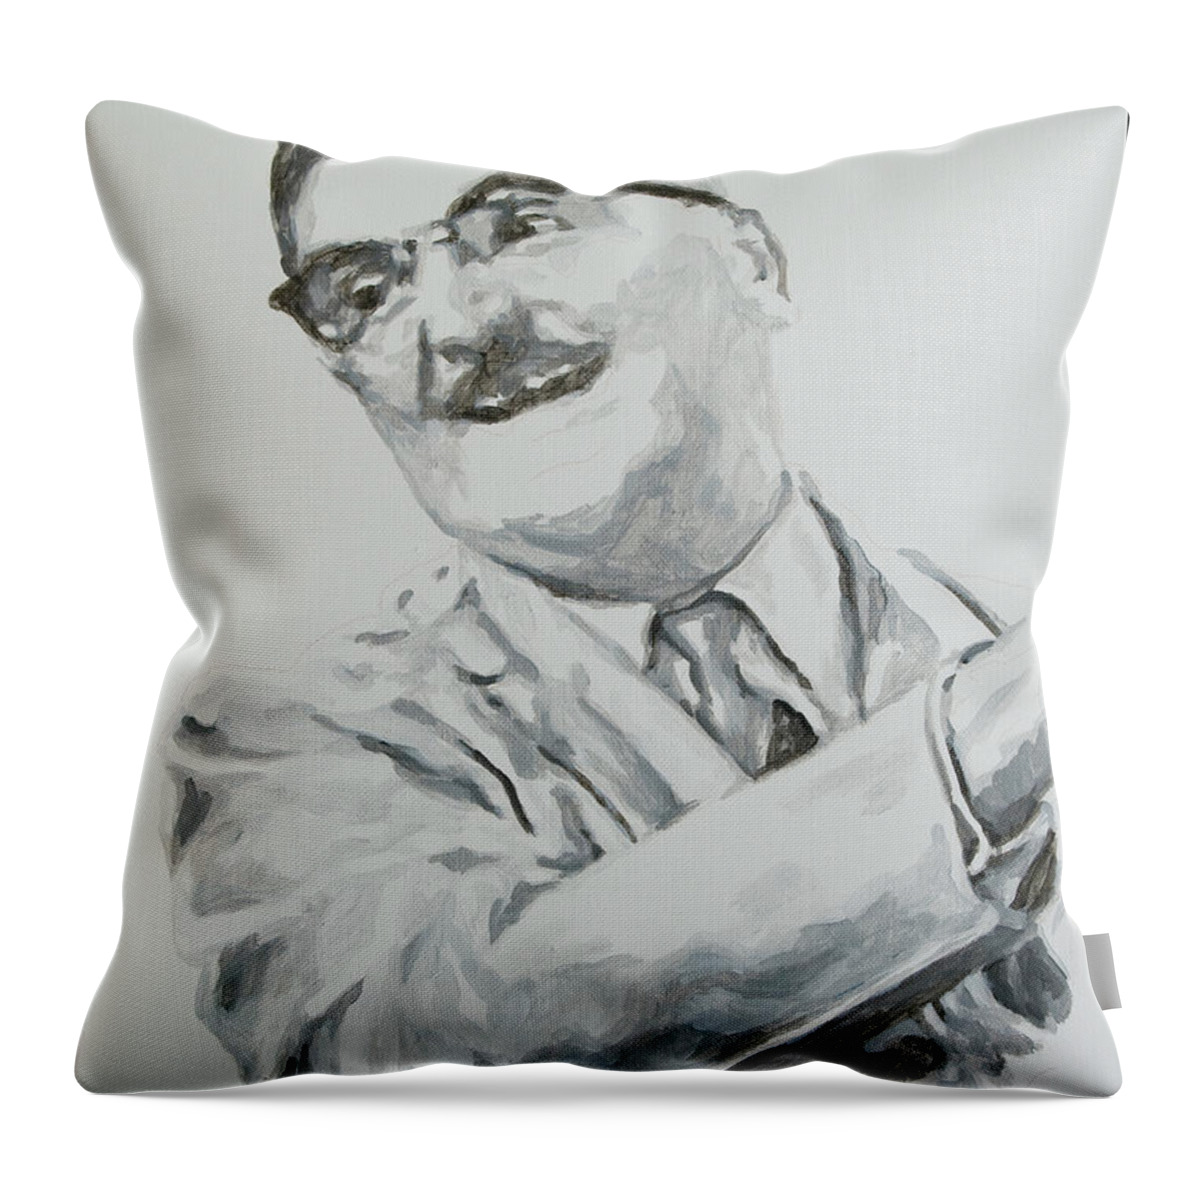 Andy Griffith Show Throw Pillow featuring the painting Floyd the barber by Tommy Midyette